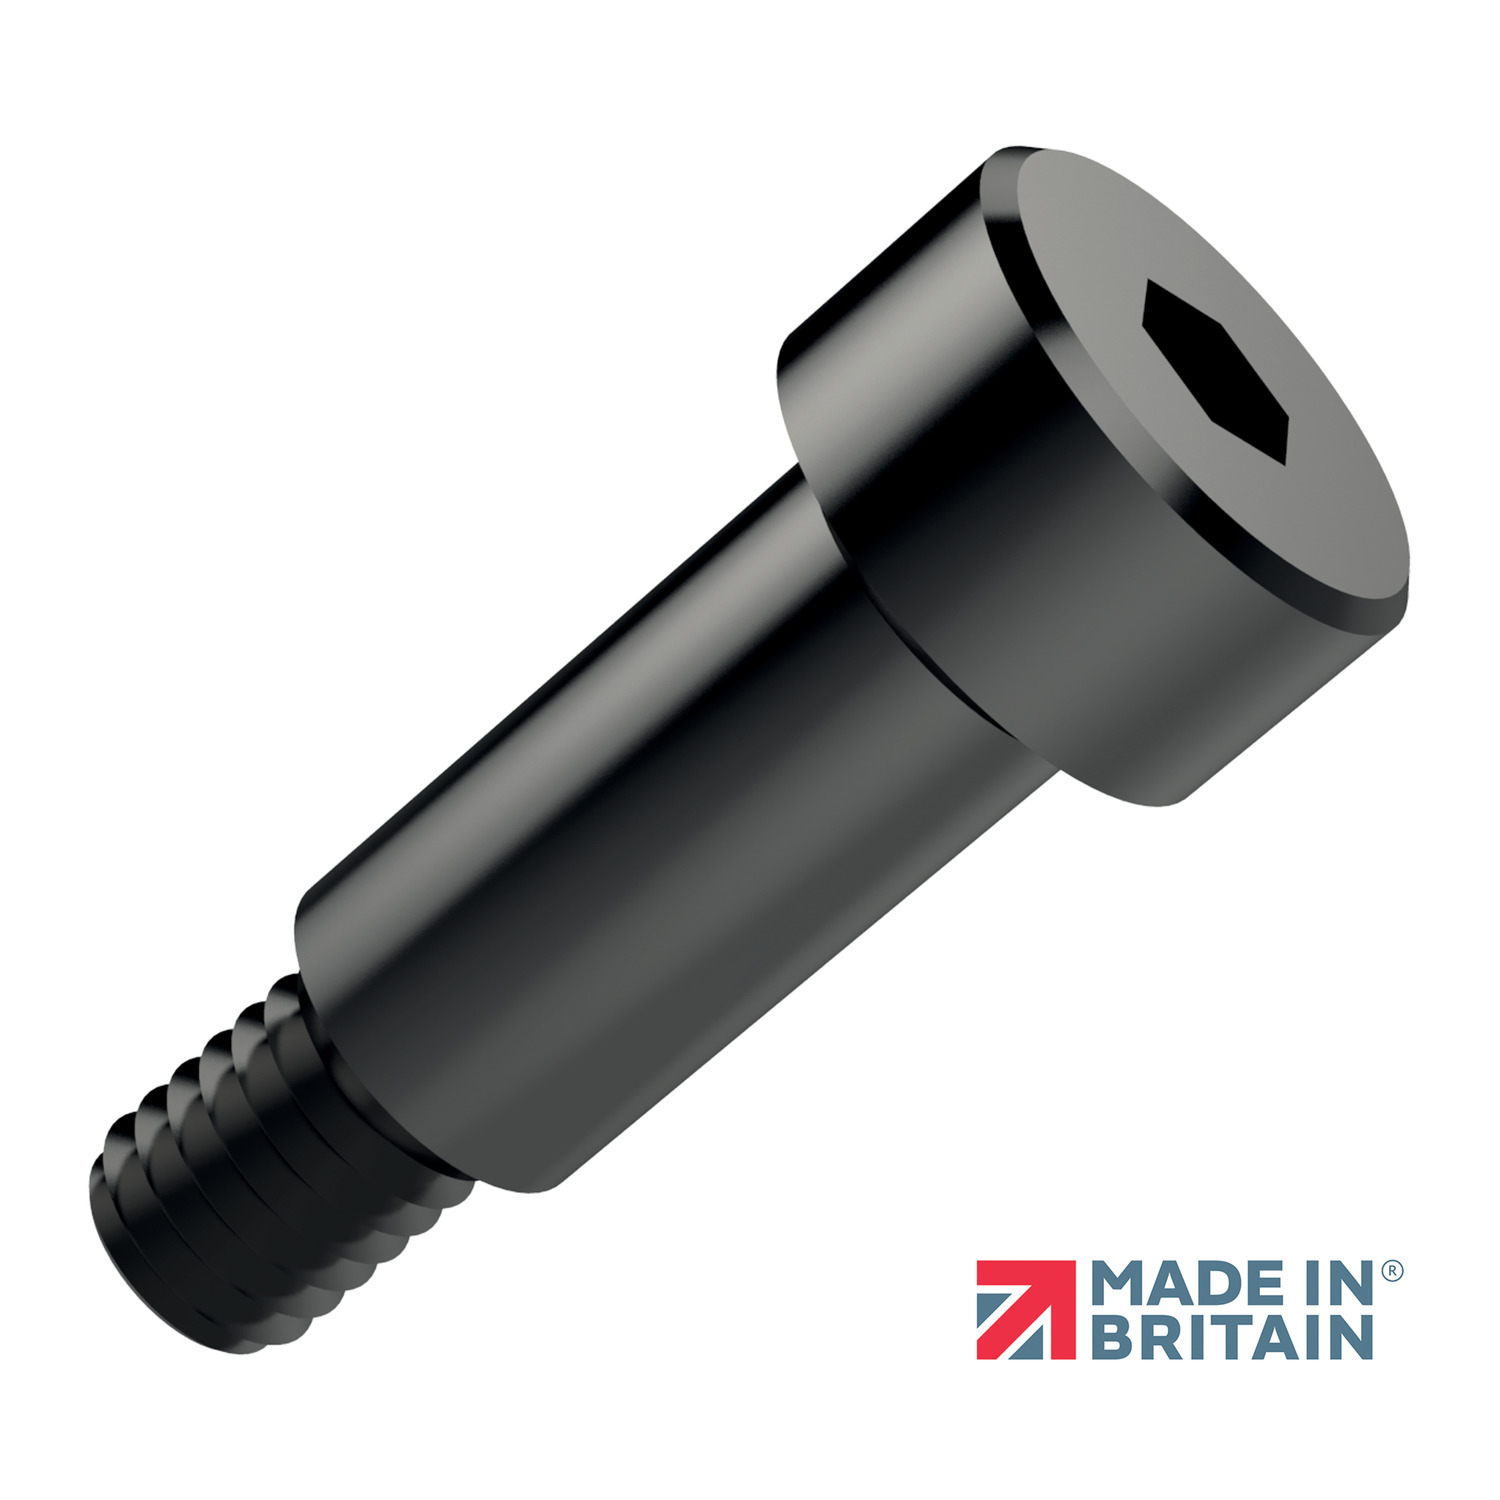 Shoulder Screws - Cap Head Black oxide coated shoulder screws are available in many different shapes and sizes!